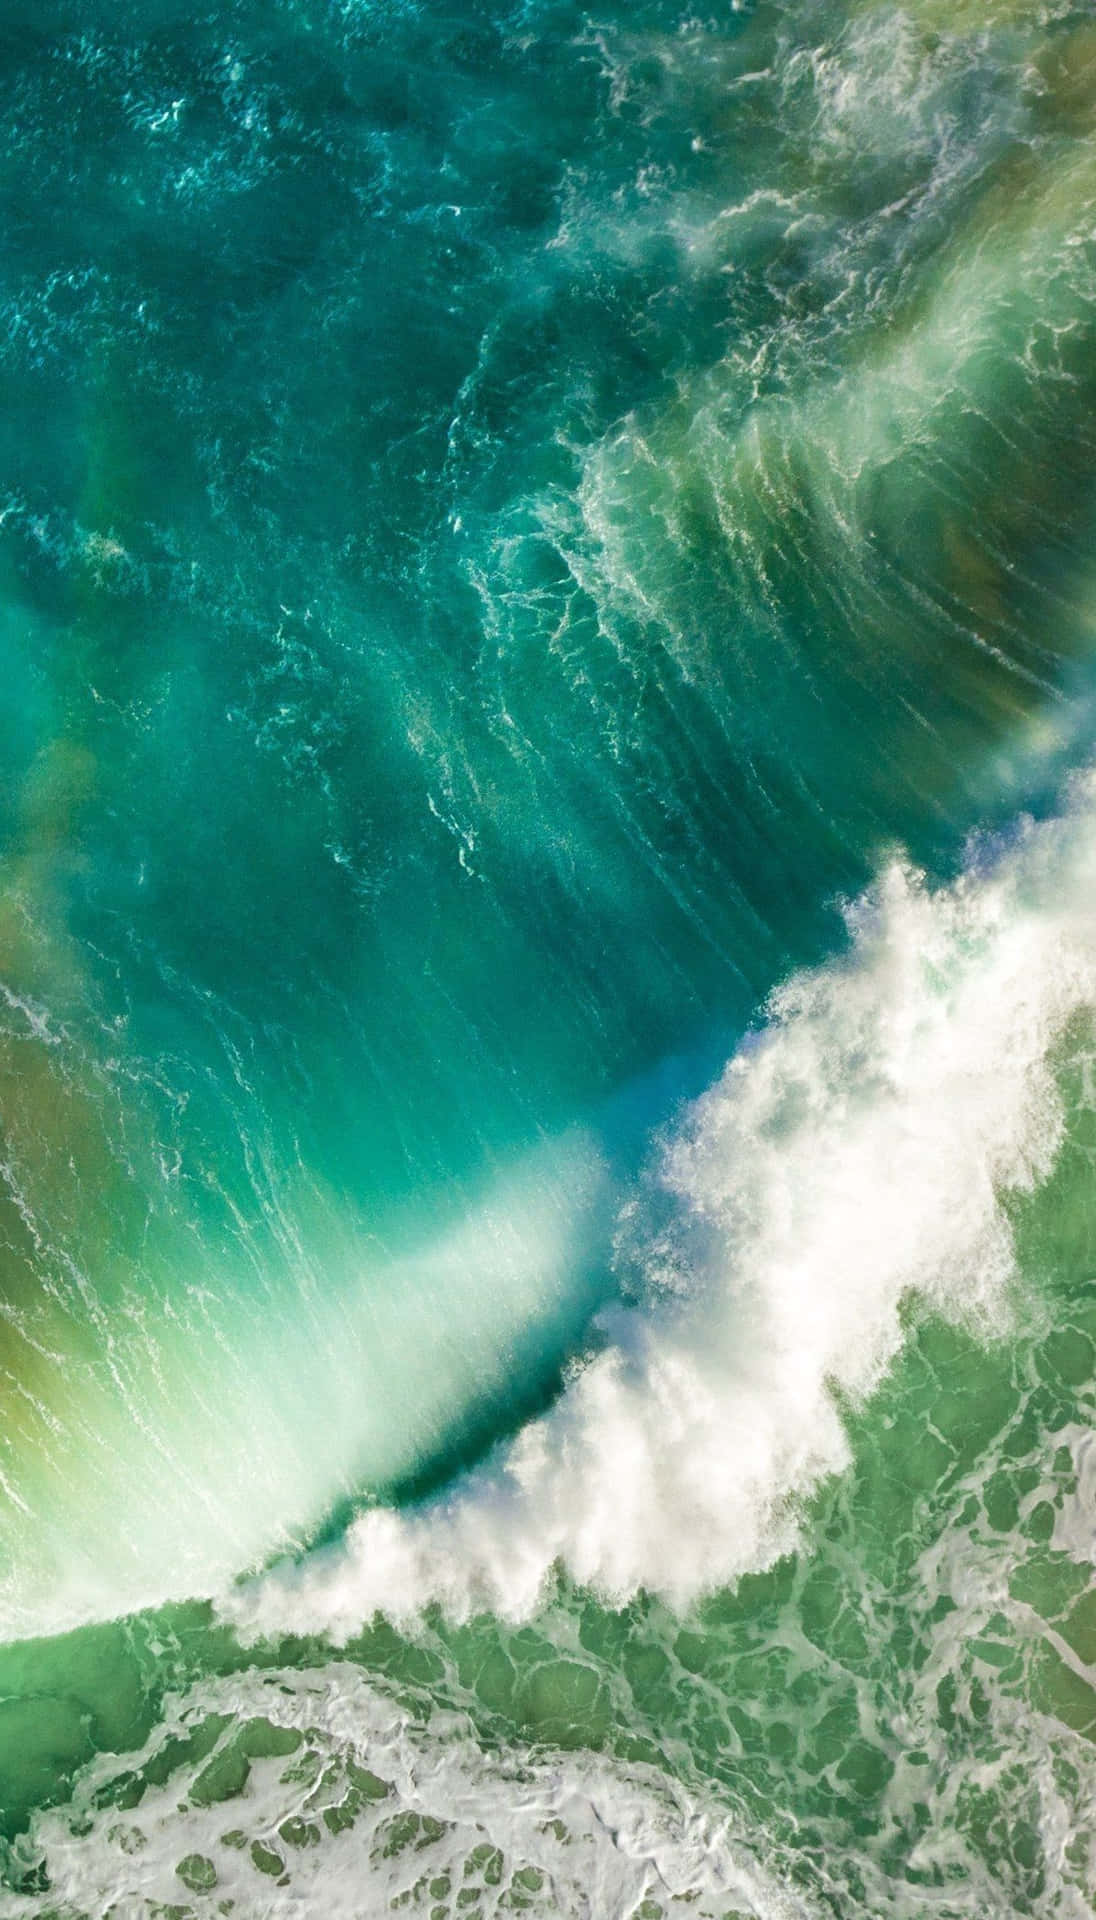 Download A Surfer Is Riding A Wave In The Ocean Wallpaper | Wallpapers.com